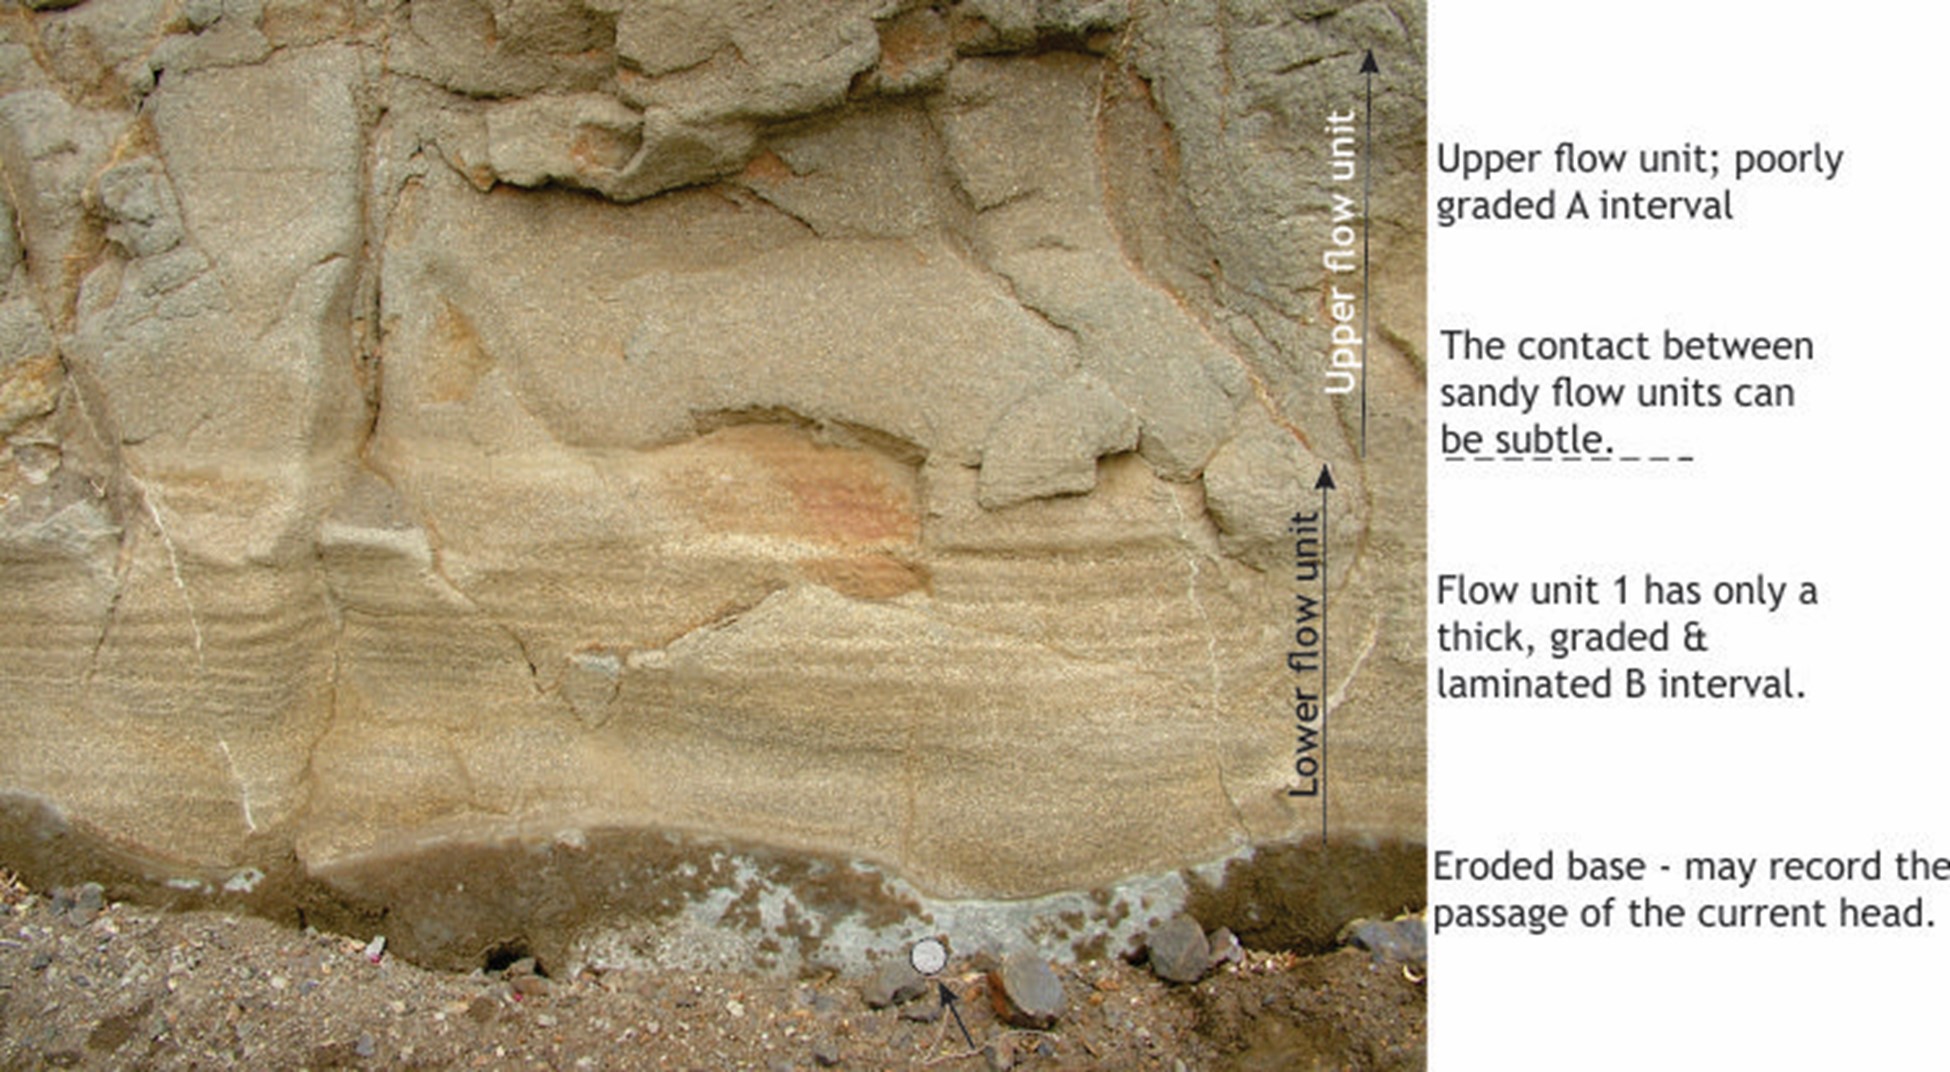 Coarse-grained sandy turbidites with A and B intervals